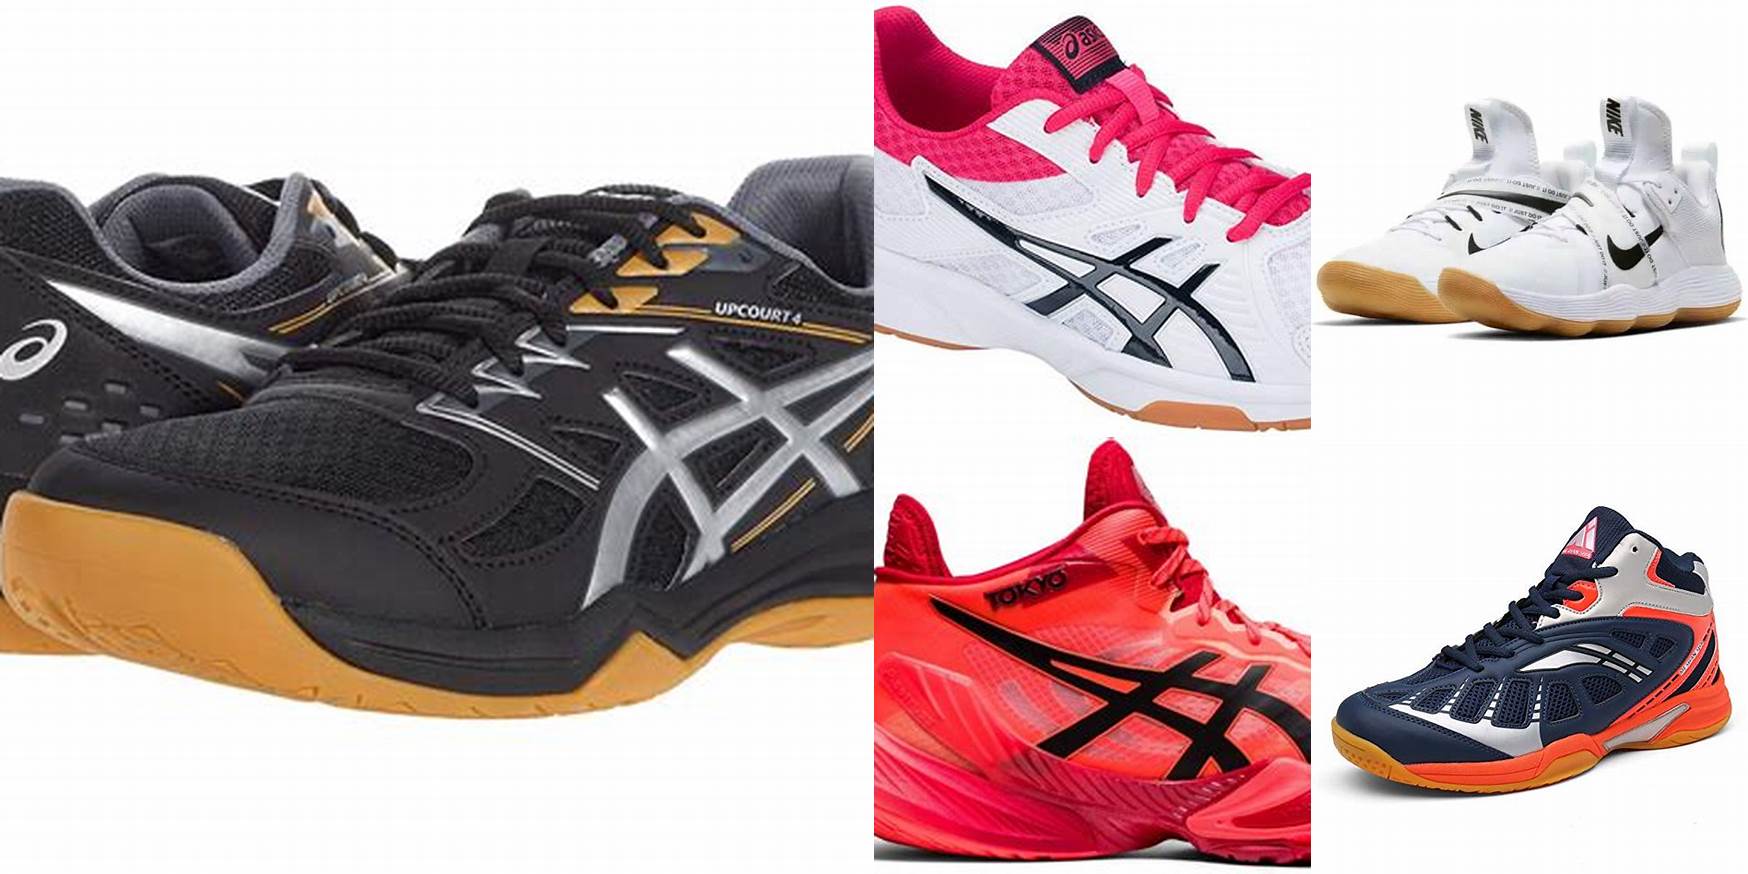 What Is The Best Volleyball Shoe